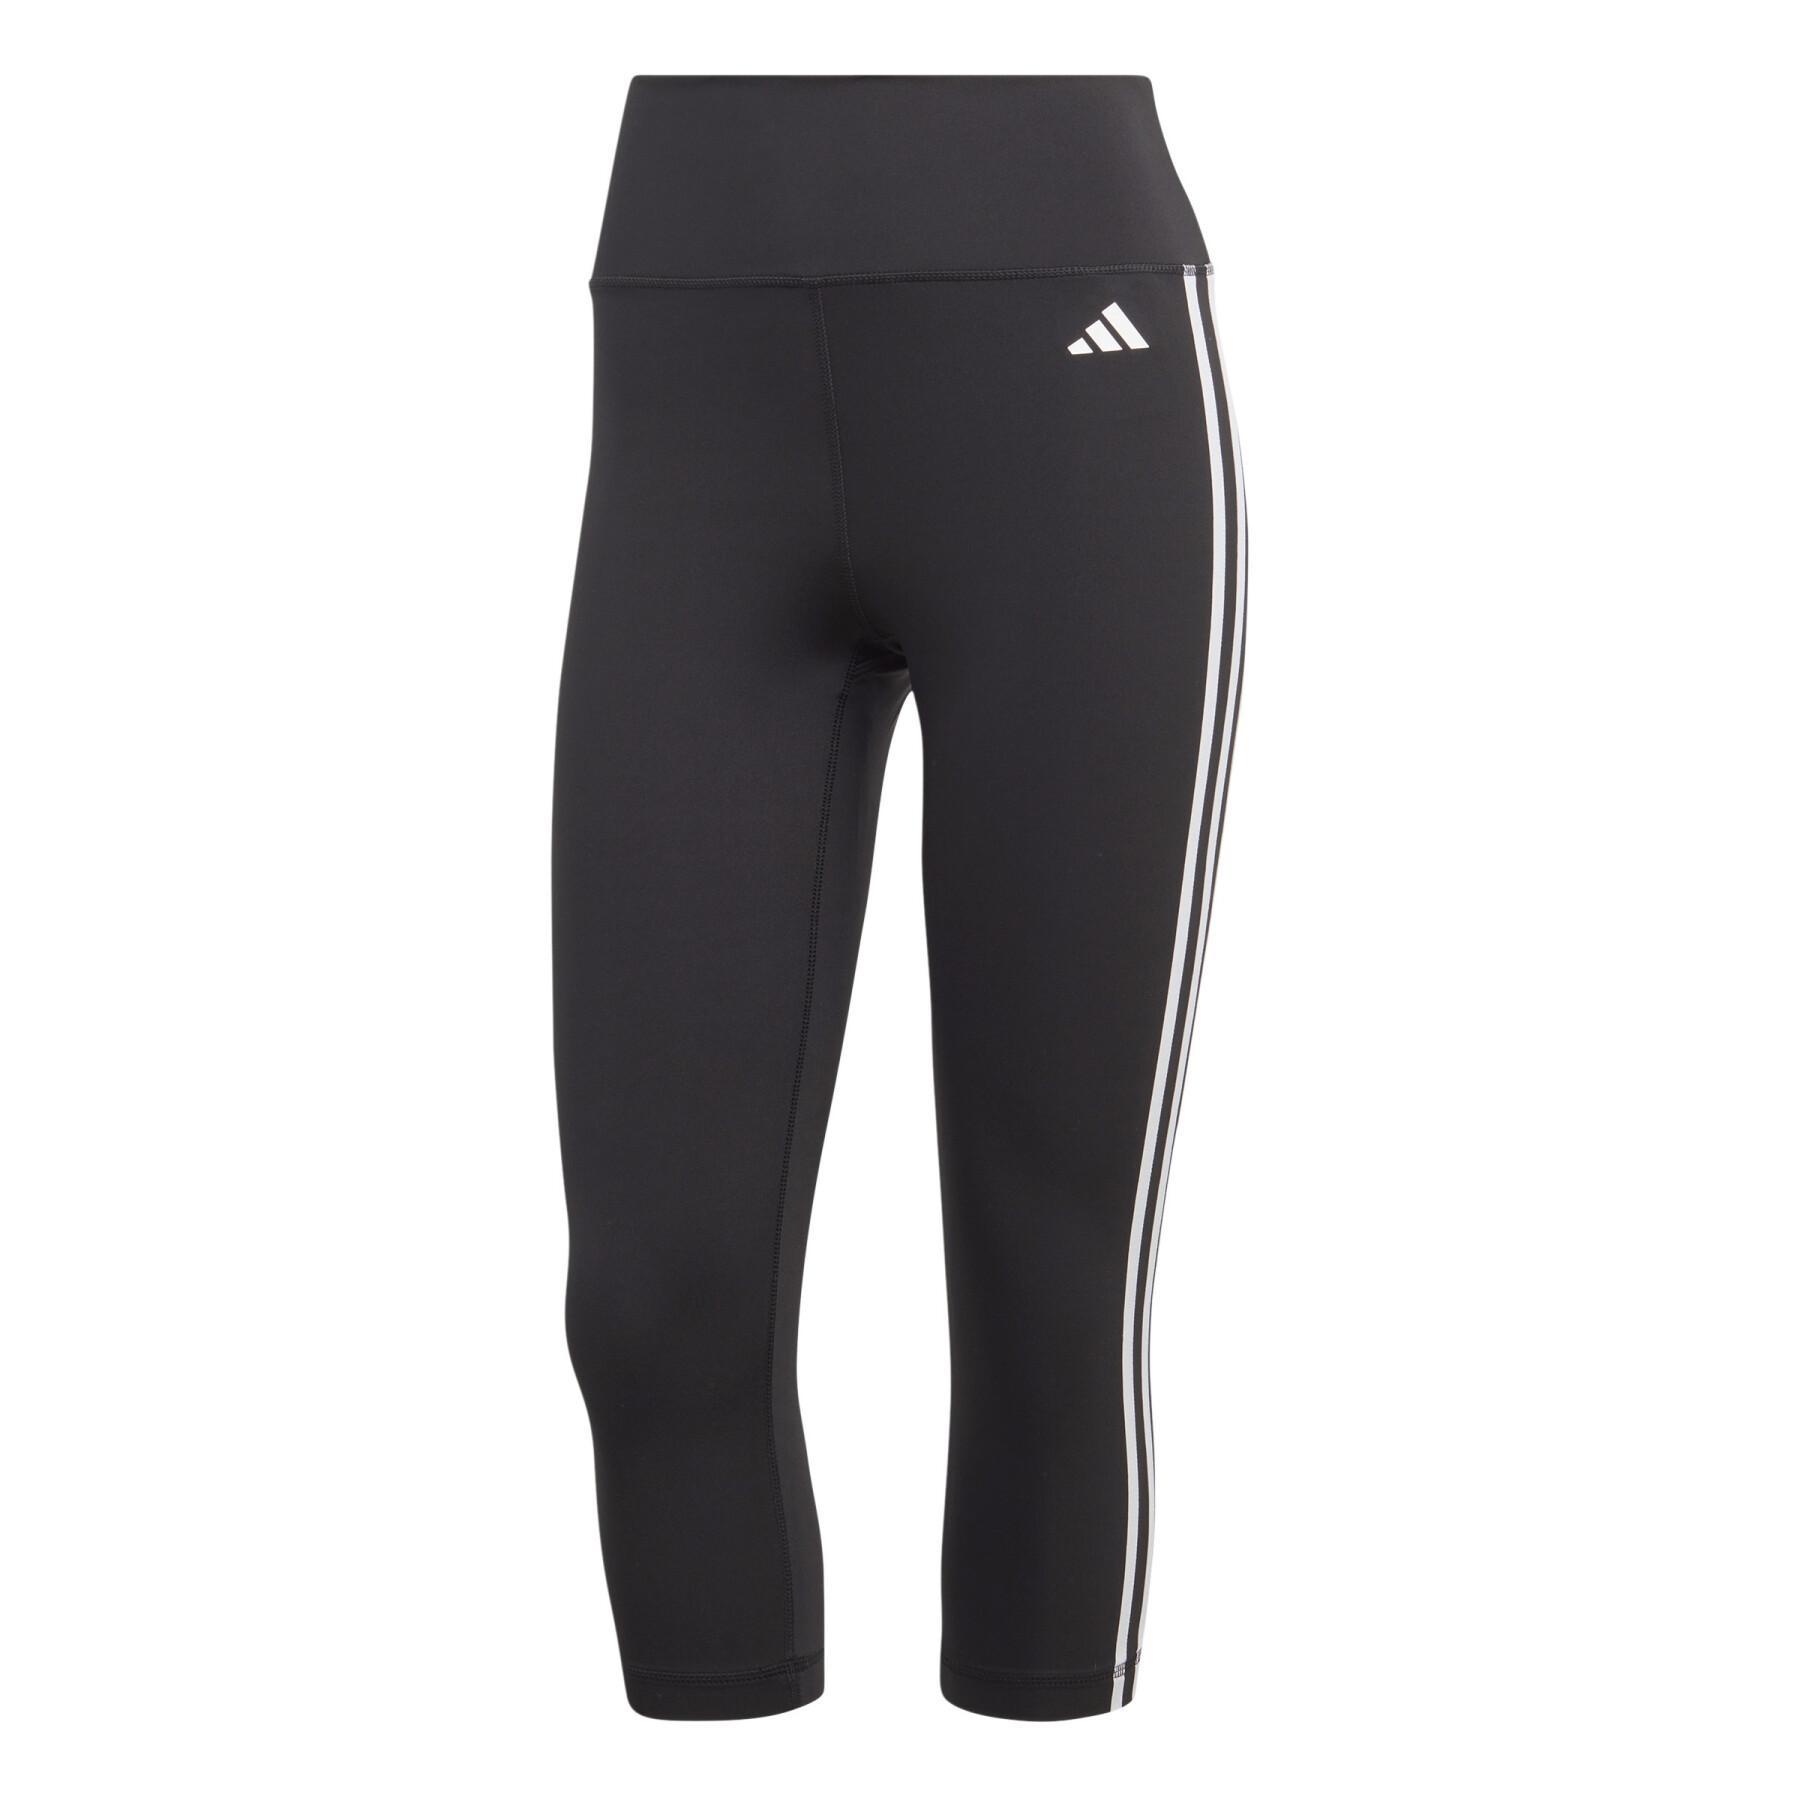 https://media.foot-store.com/catalog/product/cache/image/1800x/9df78eab33525d08d6e5fb8d27136e95/a/d/adidas_ht5437_1_apparel_photography_front_view_white_xo.jpg